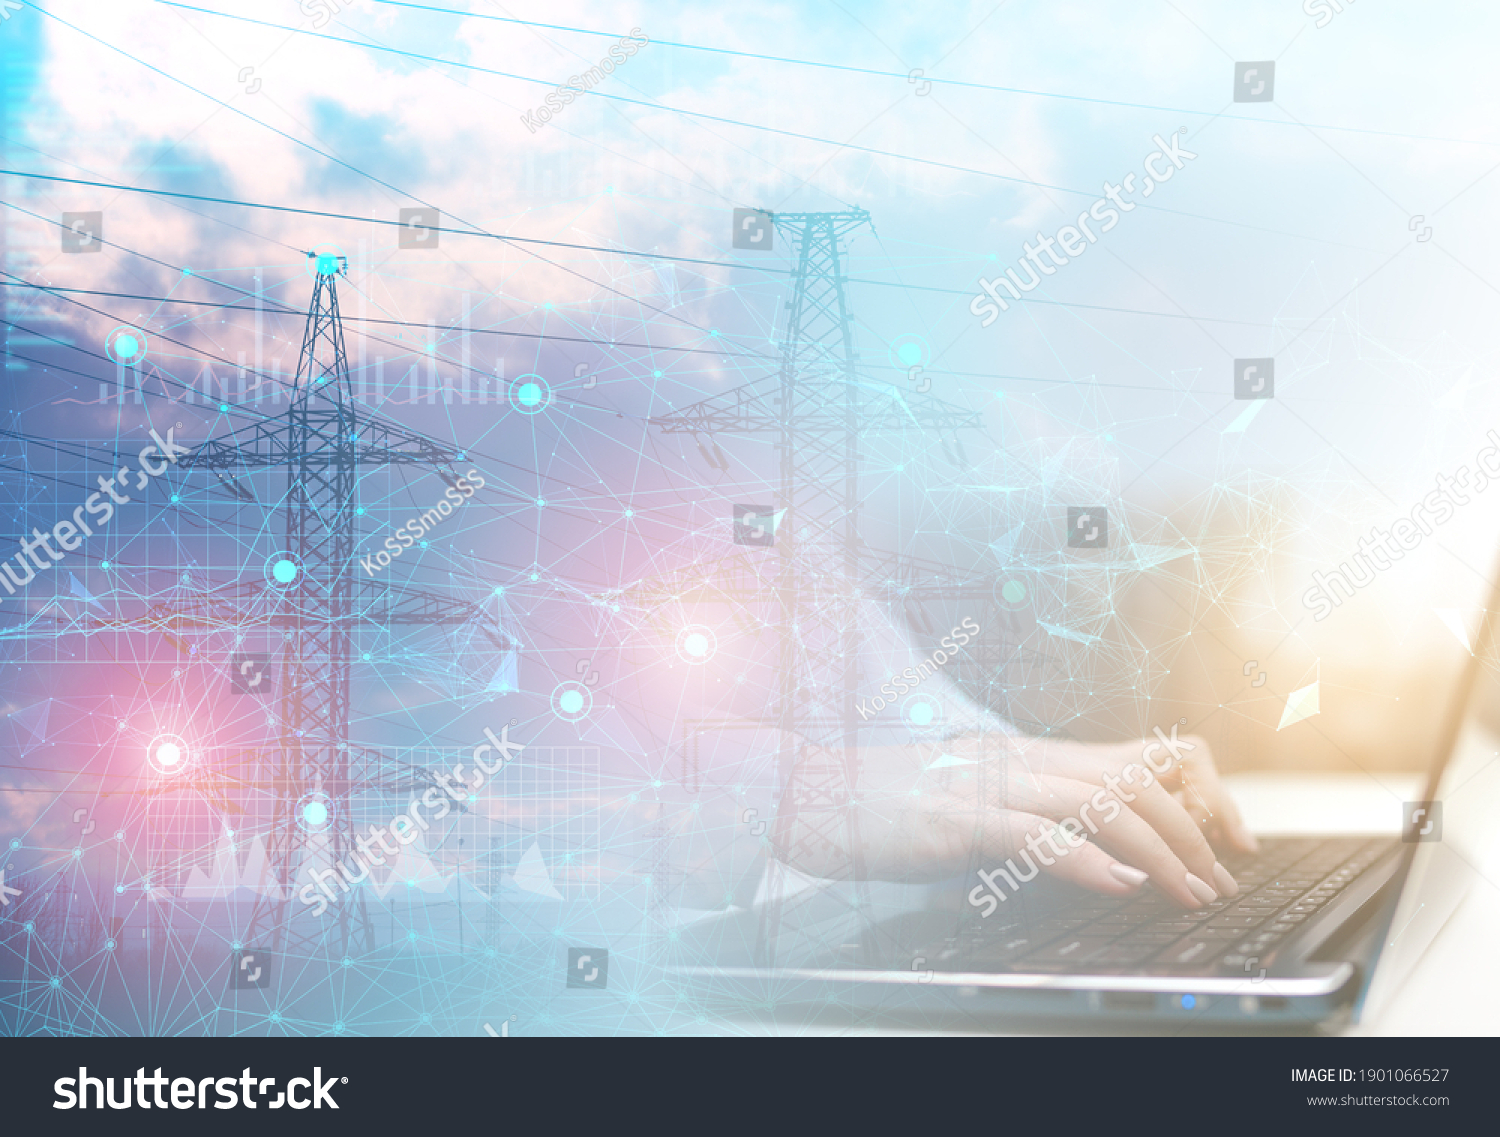 the concept of the development of wireless transmission of electricity and the analysis of electricity consumption by a person with data transmission to cloud servers. The Internet of Things in Energy #1901066527